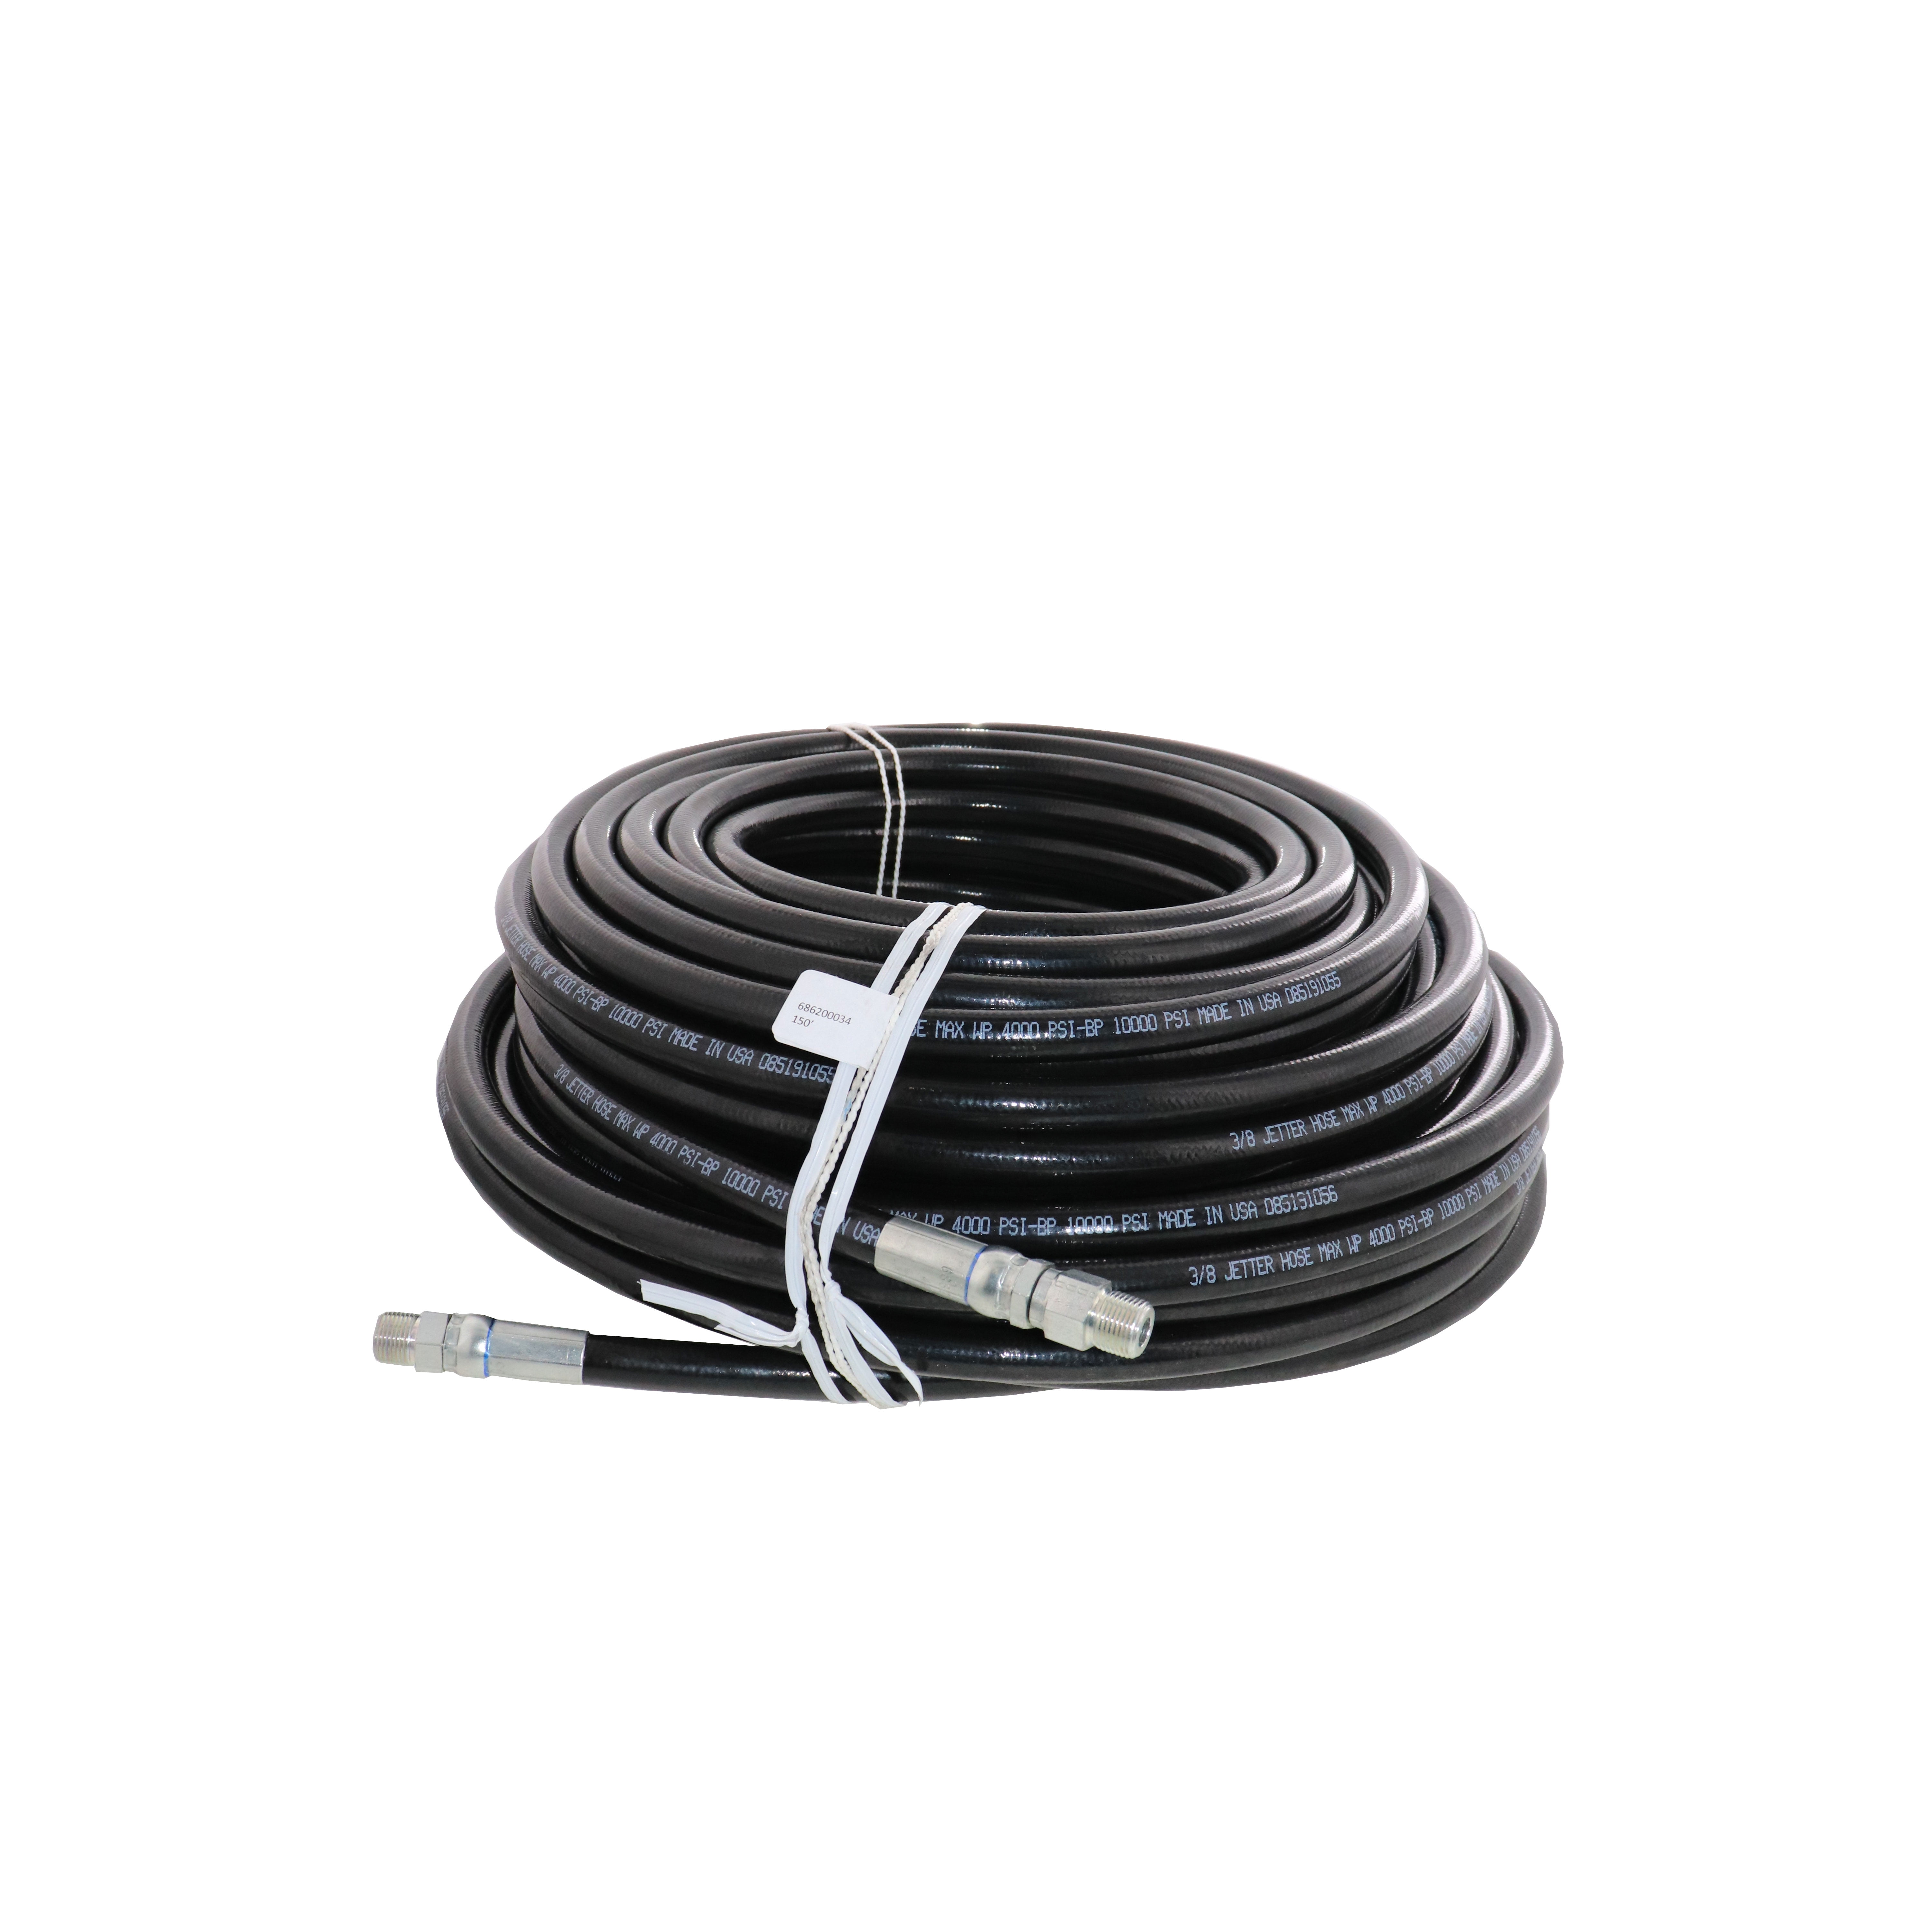 x 250ft Schieffer 3/8in 4000 PSI Thermoplastic Sewer Jetter Hose & 12.0 Orifice Button Nose Nozzle 